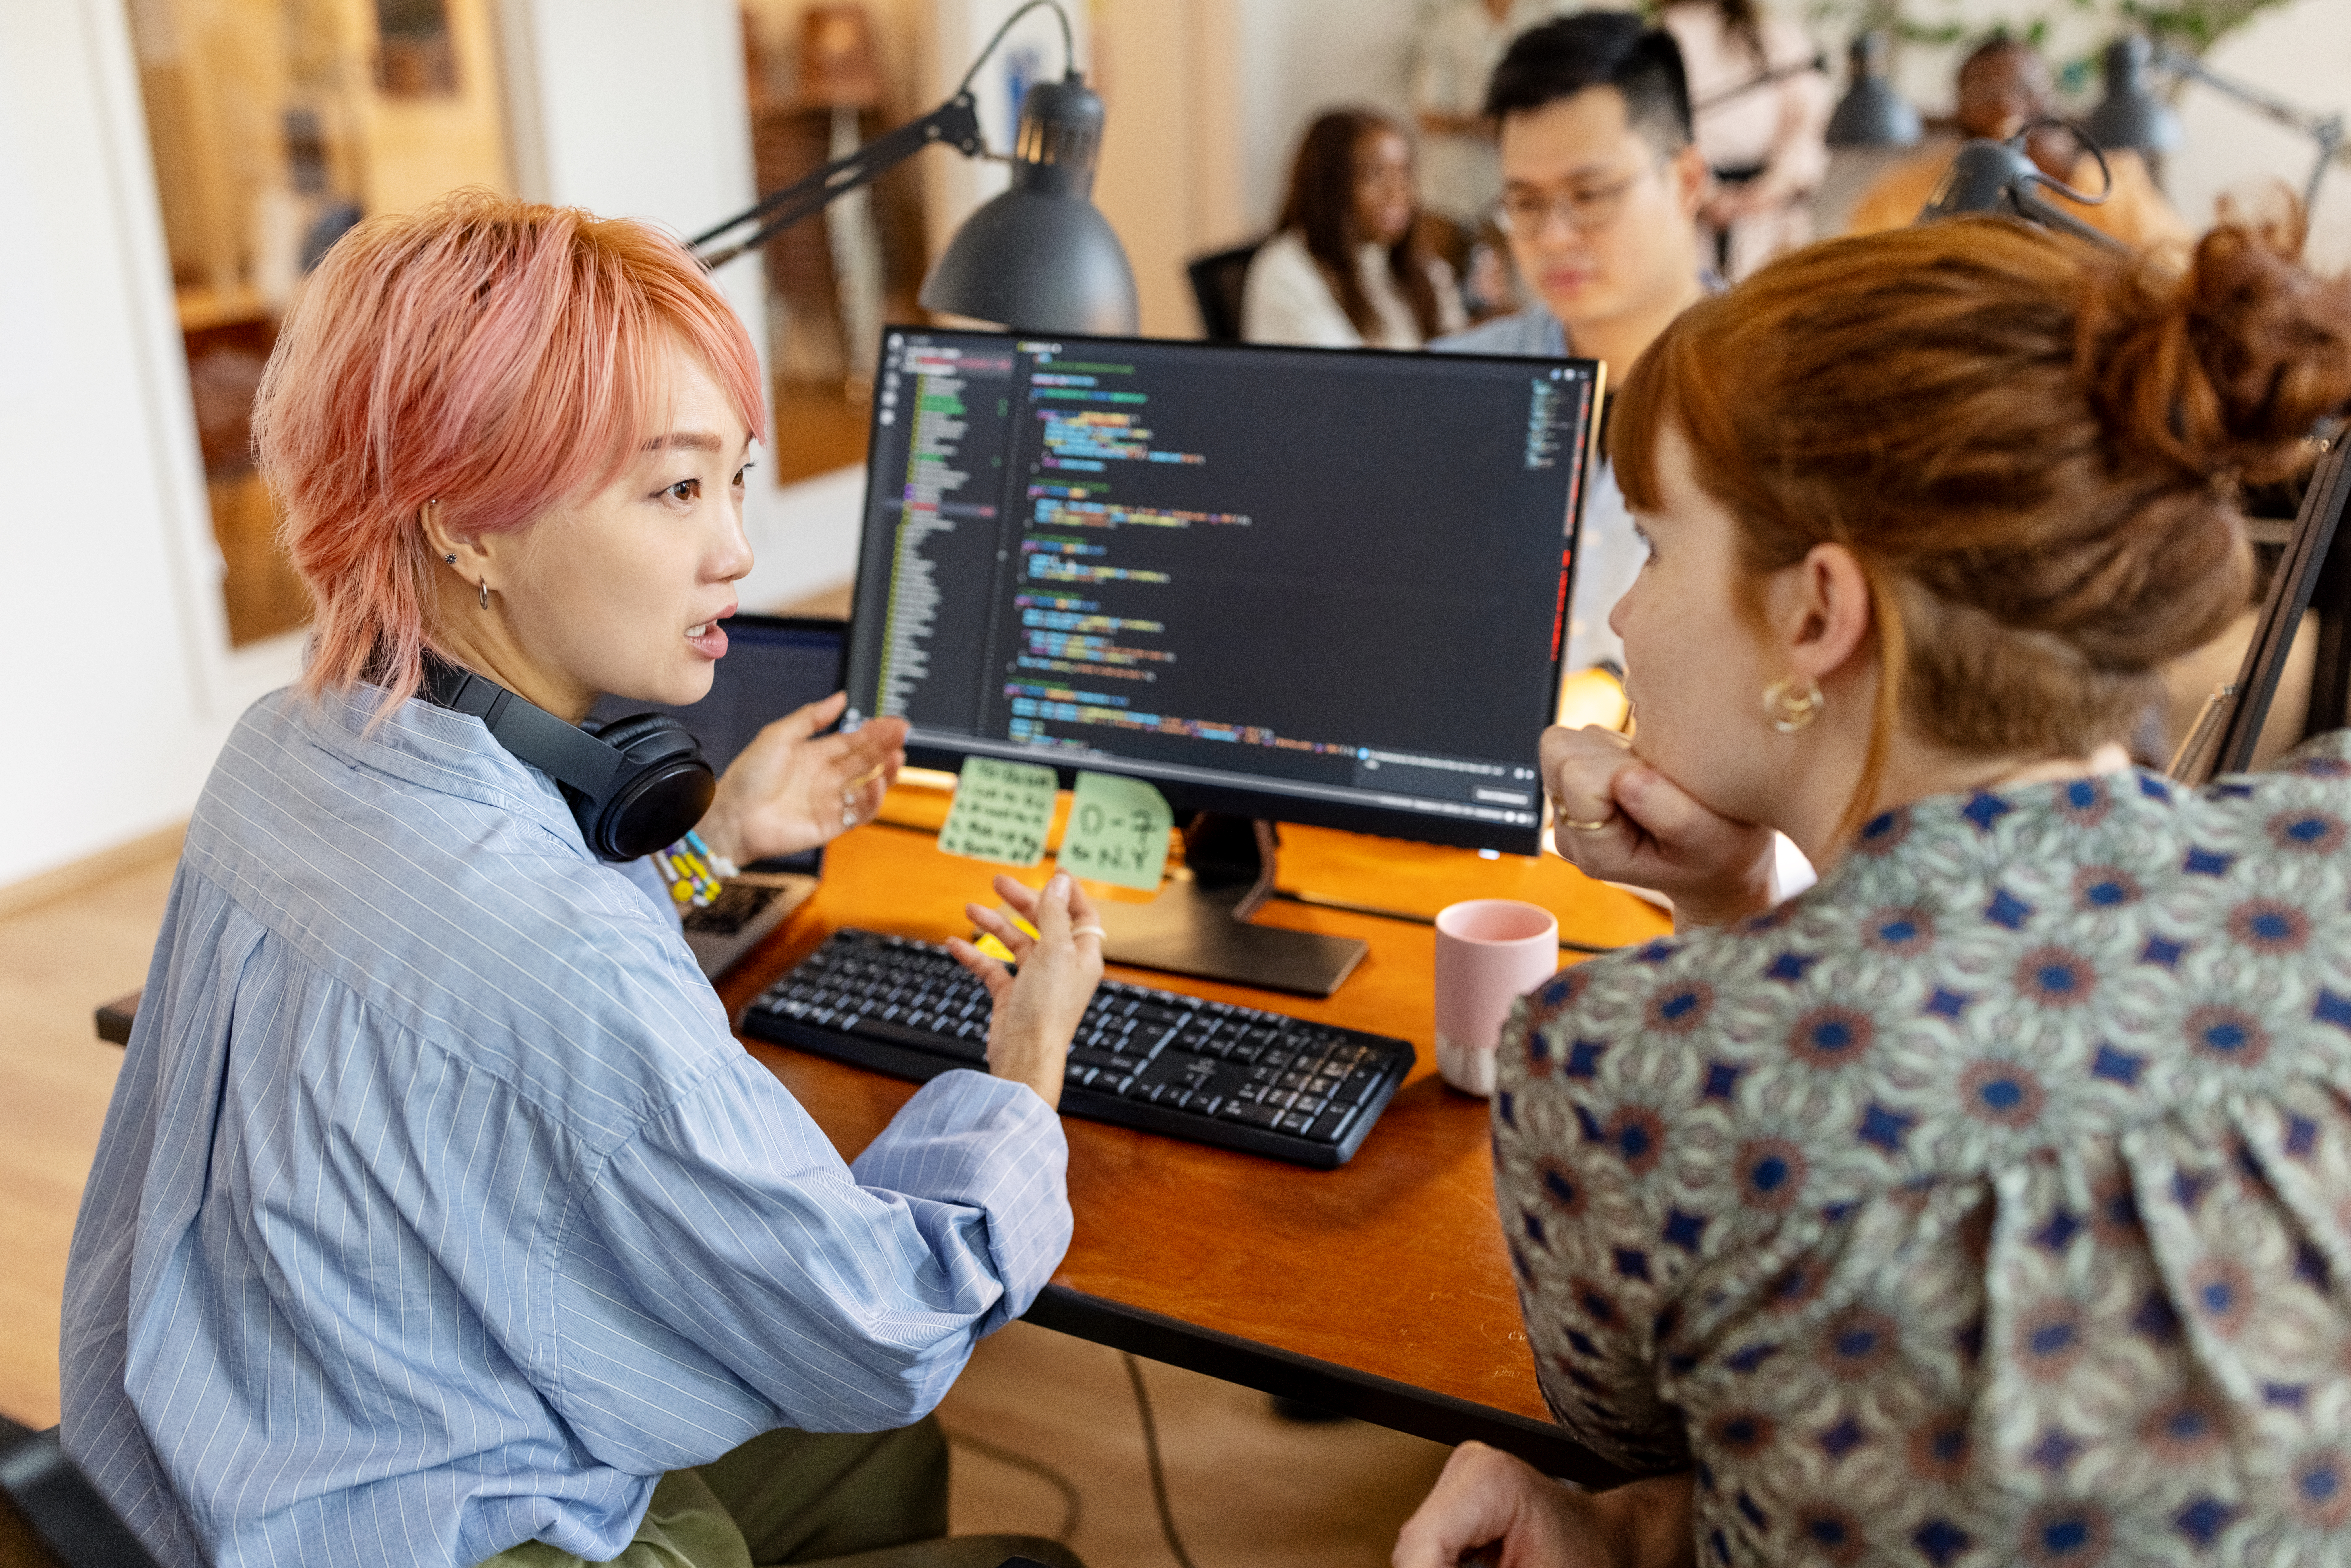 Two workers at a computer discussing enterprise mobility management solutions.